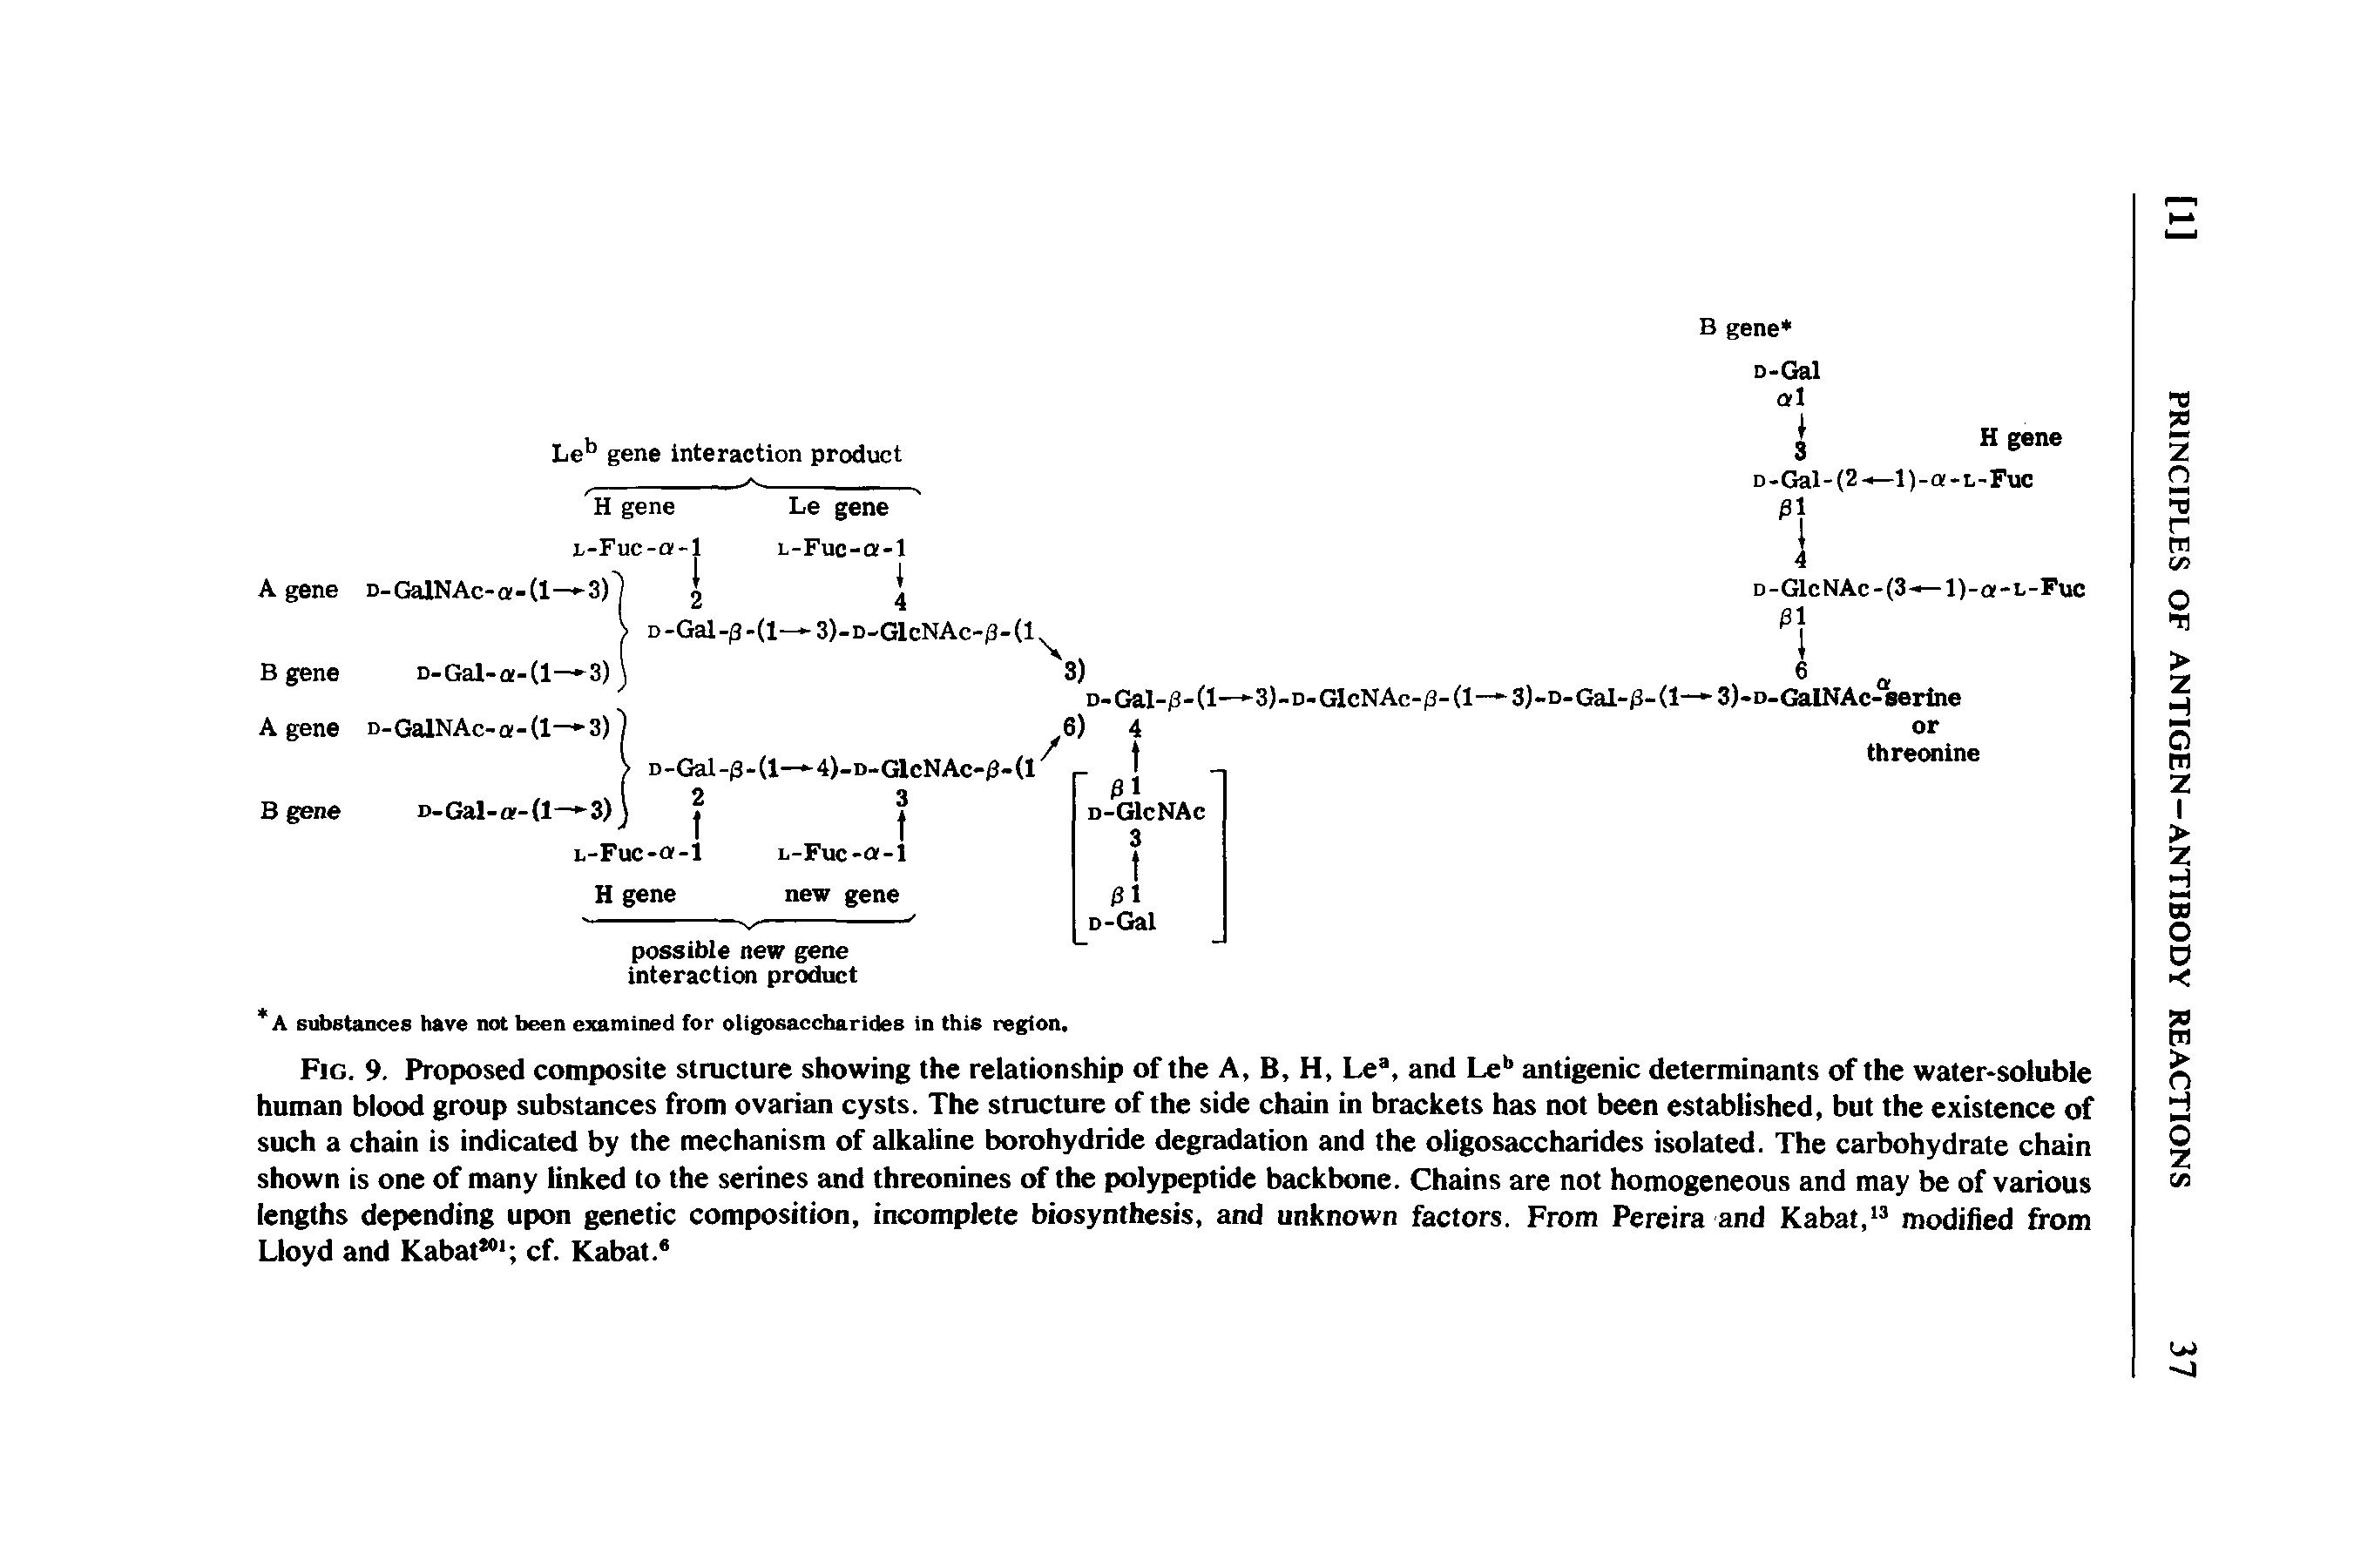 Fig. 9. Proposed composite structure showing the relationship of the A, B, H, Le , and Le antigenic determinants of the water-soluble human blood group substances from ovarian cysts. The structure of the side chain in brackets has not been established, but the existence of such a chain is indicated by the mechanism of alkaline borohydride degradation and the oligosaccharides isolated. The carbohydrate chain shown is one of many linked to the serines and threonines of the polypeptide backbone. Chains are not homogeneous and may be of various lengths depending upon genetic composition, incomplete biosynthesis, and unknown factors. From Pereira and Kabat, modified from Lloyd and Kabat cf. Kabat. ...